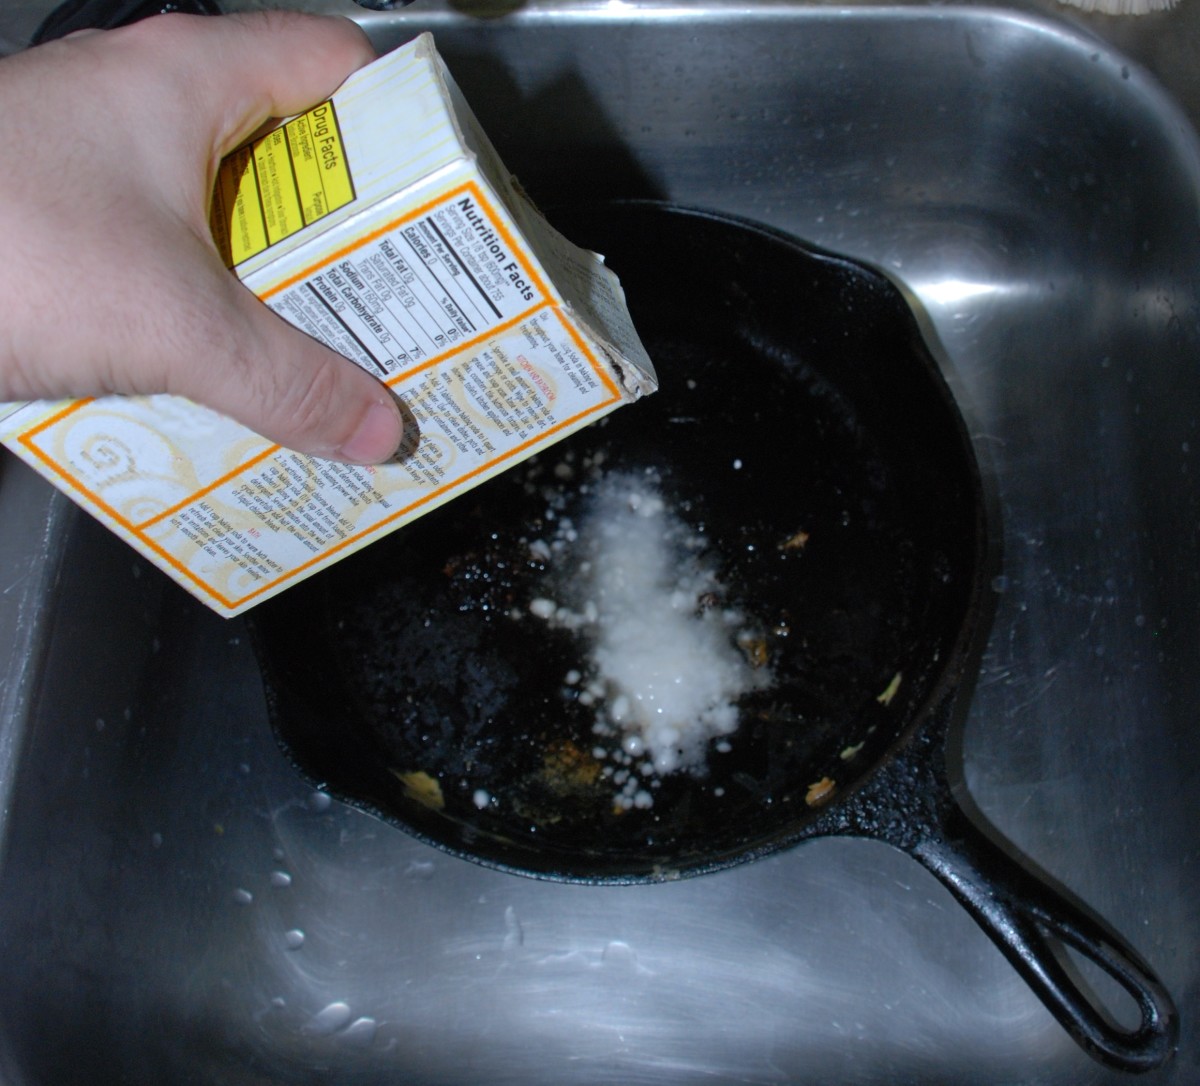 Baking soda can be a lifesaver for cleaning cast iron.